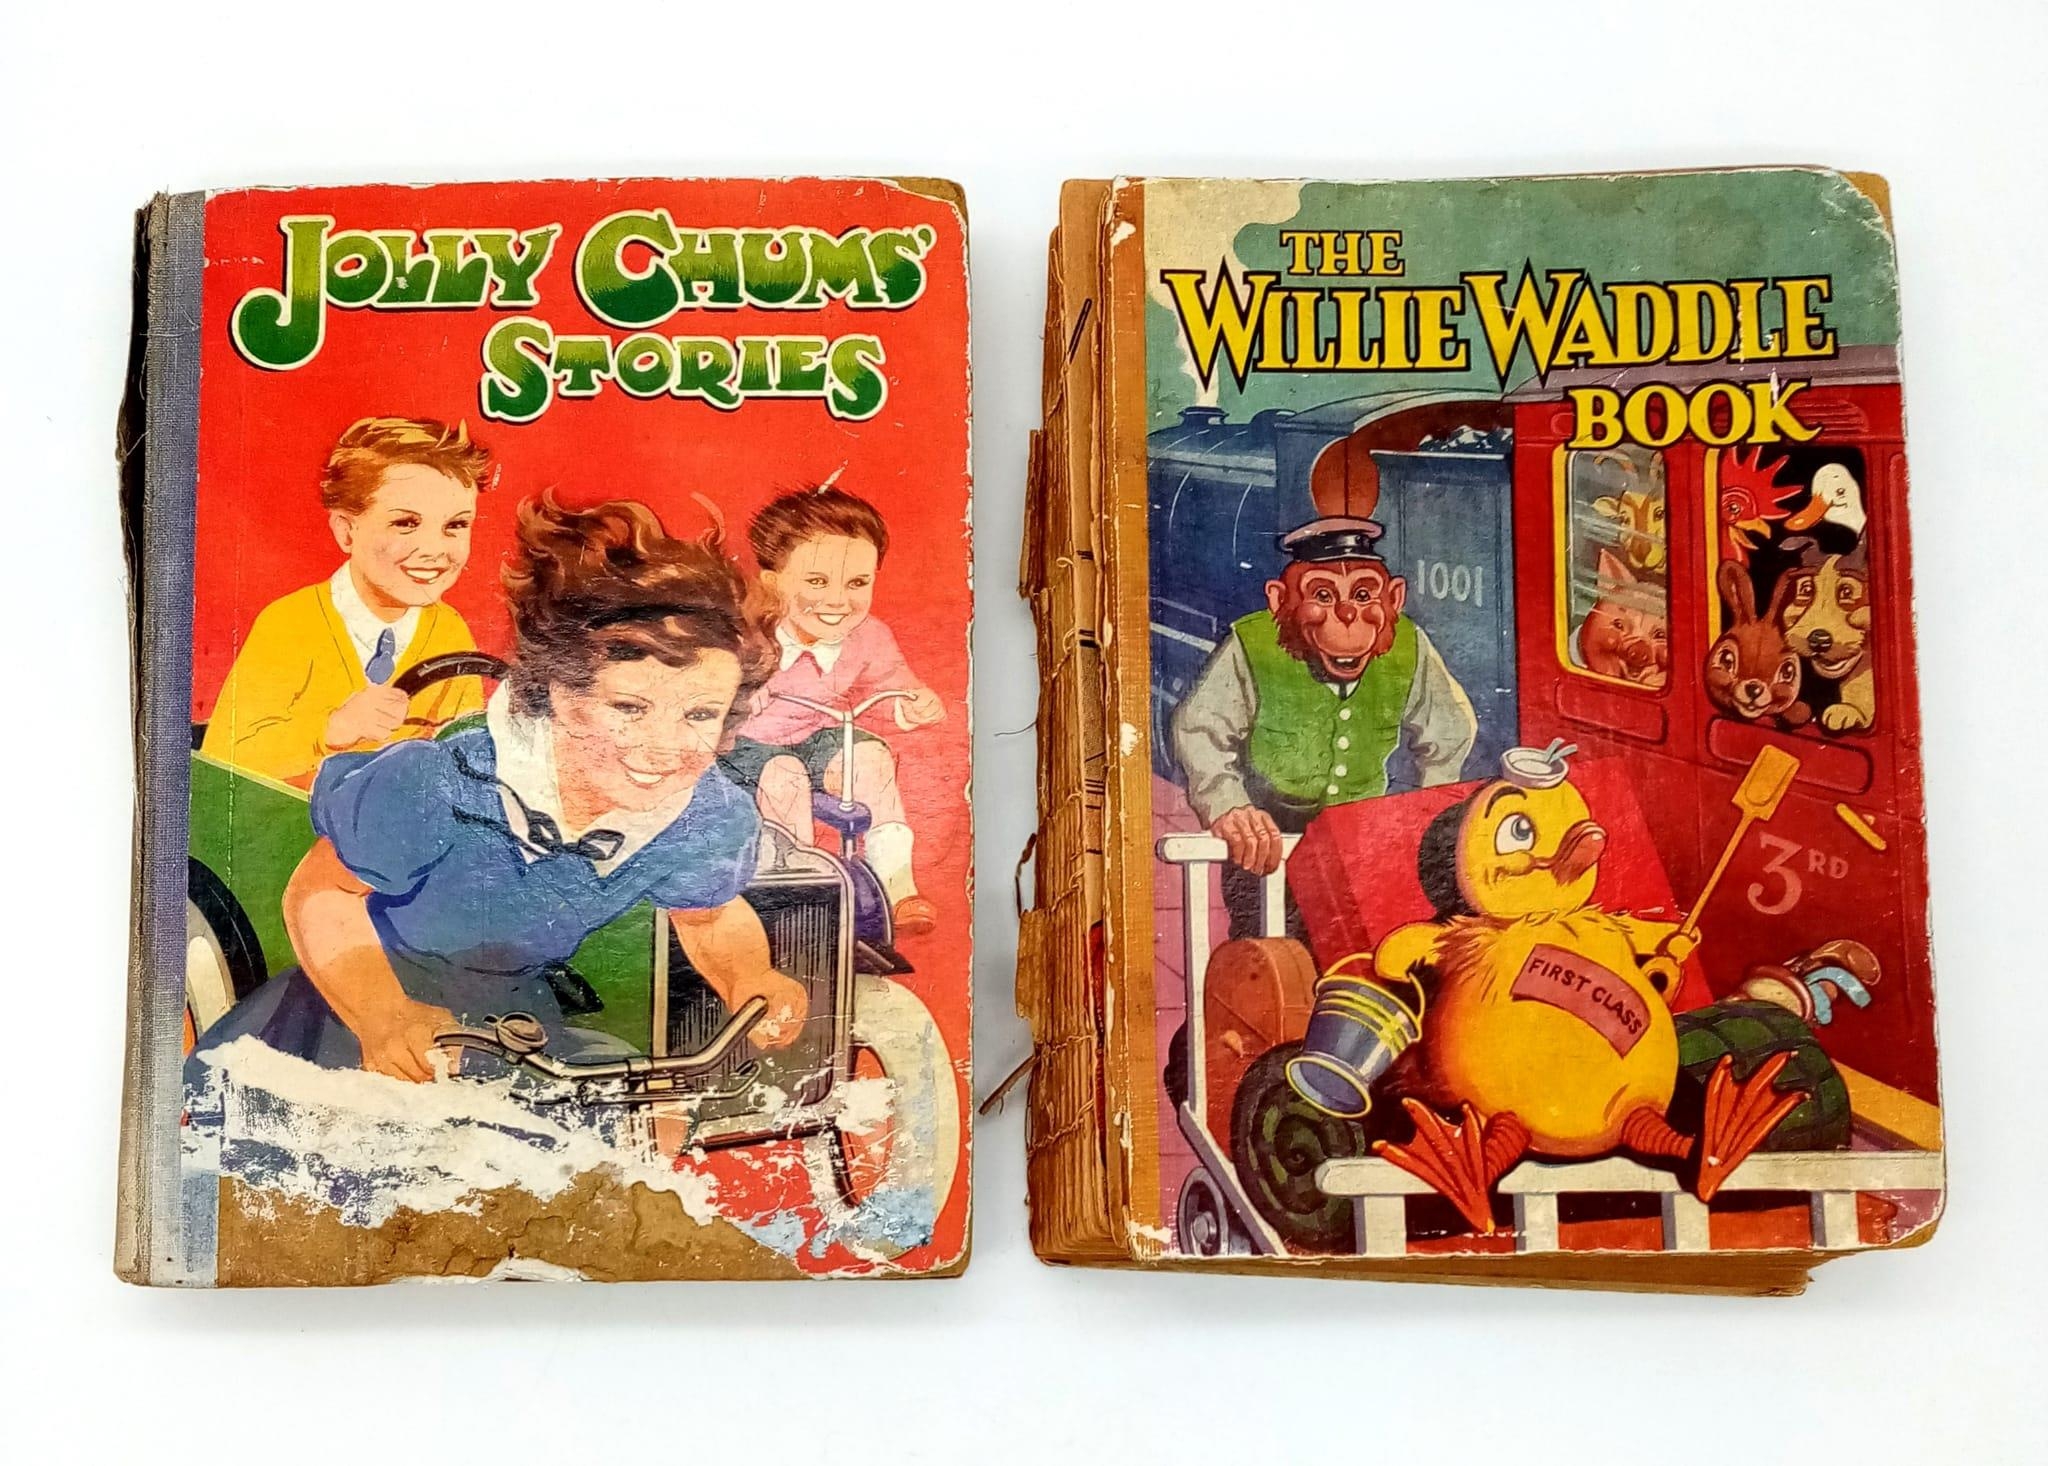 Two rare children's books from the 1930's. The Willie Waddle book and Jolly chums stories. Willie